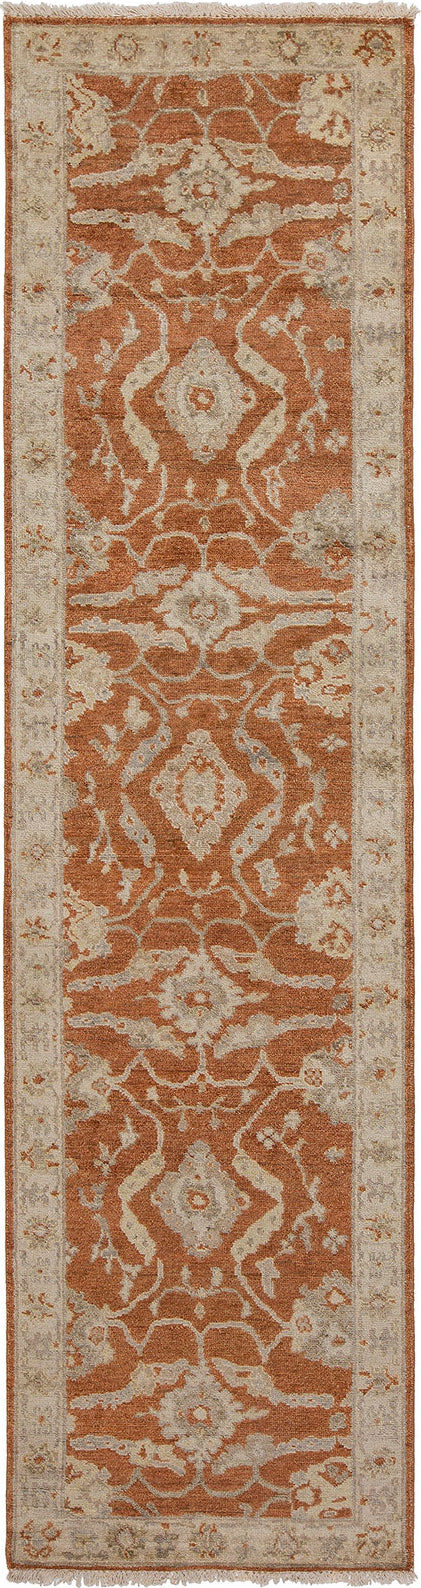 Ancient Boundaries Omni OMN-43 Spice/Linen Area Rug Lifestyle Image Feature